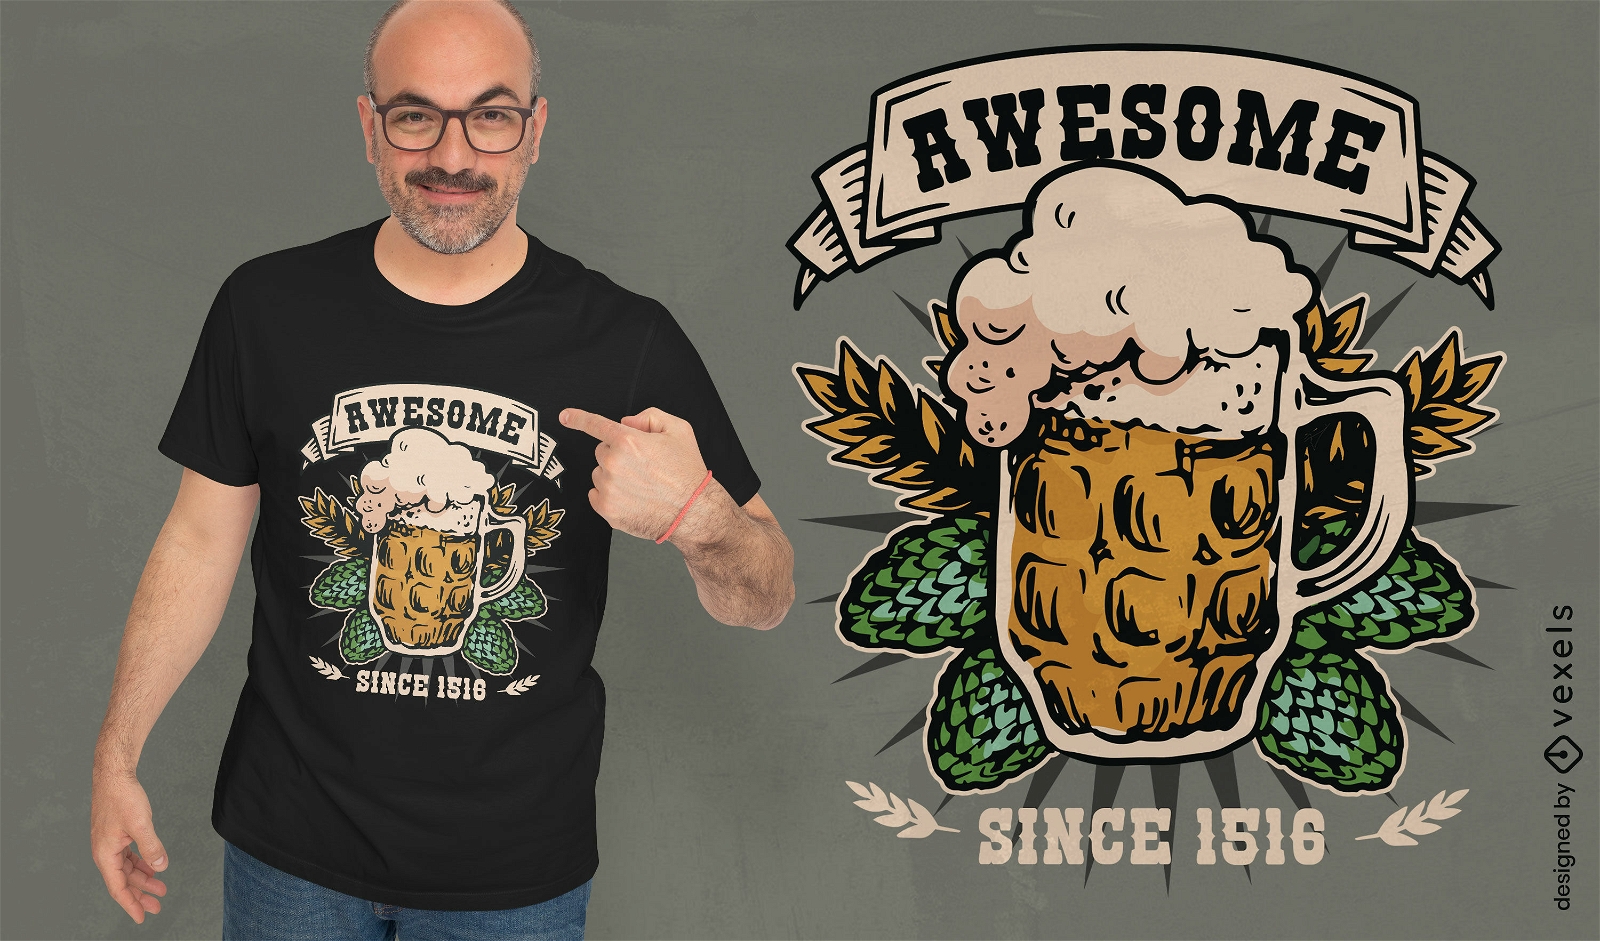 Awesome beer badge t-shirt design